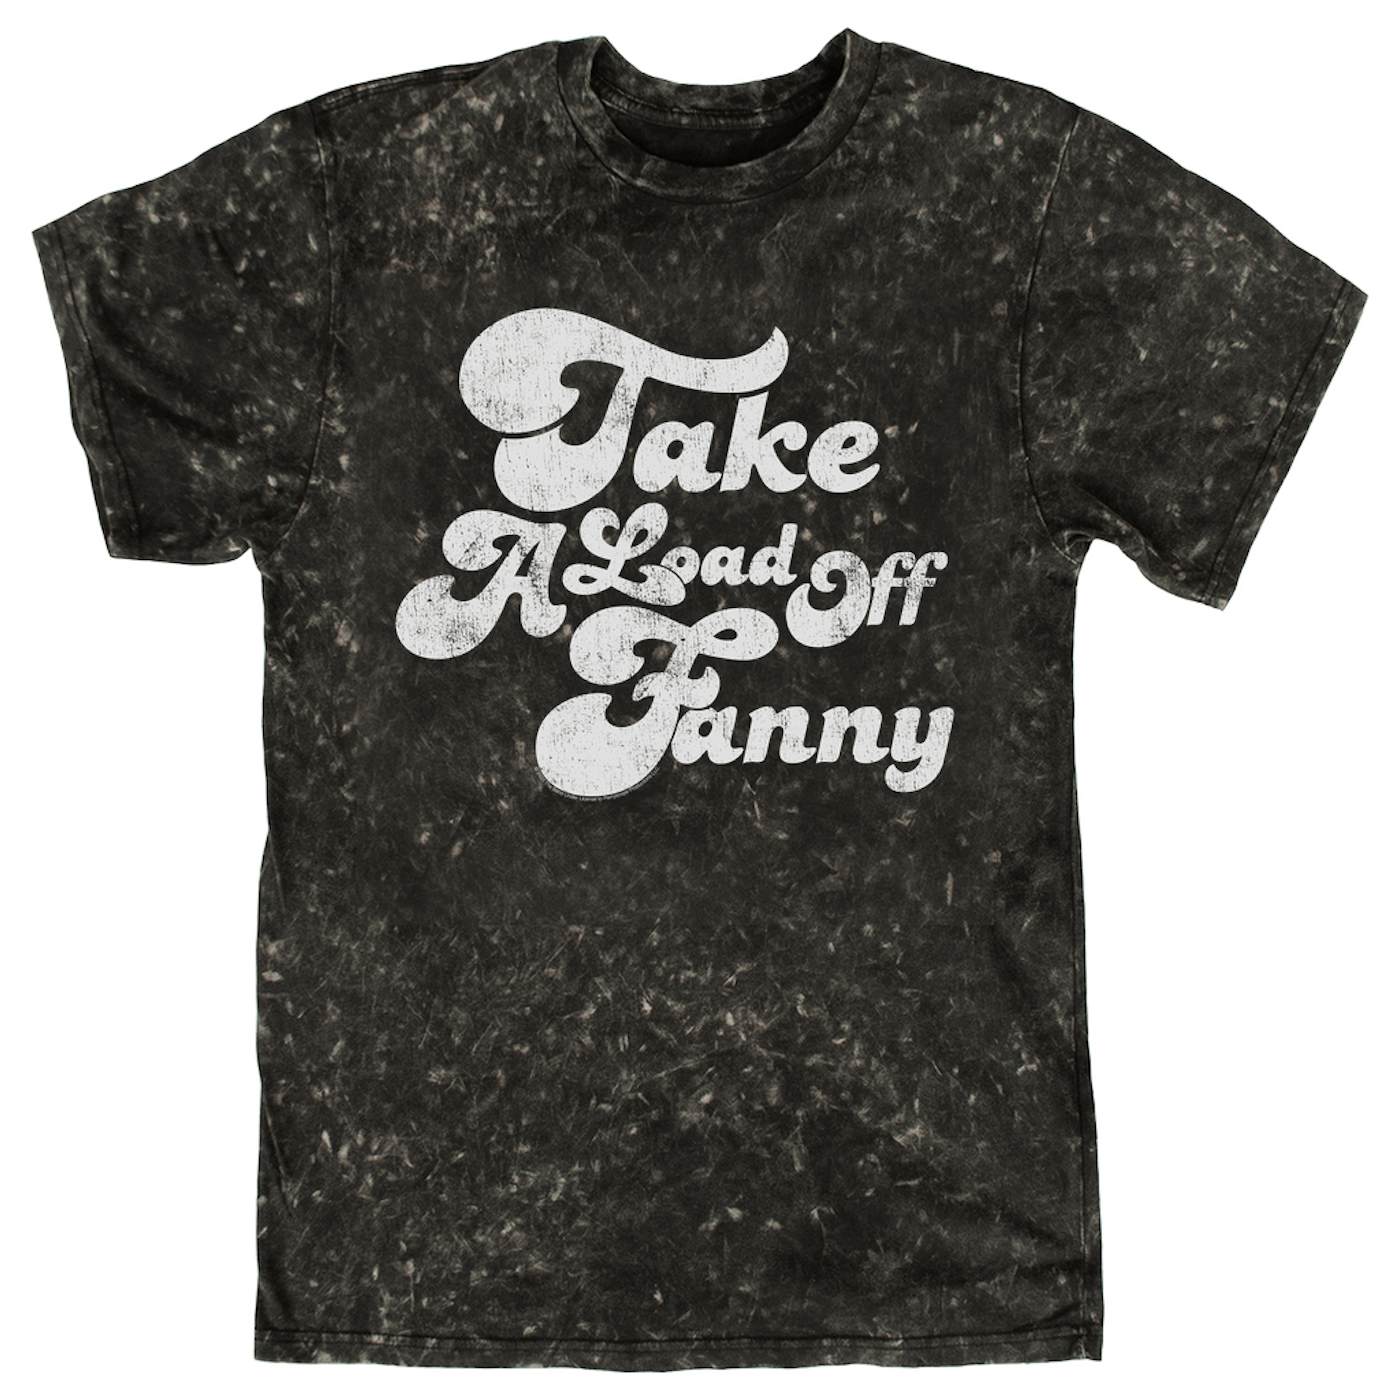 The Band T-shirt | Take A Load Off Fanny Distressed The Band Mineral Wash Shirt